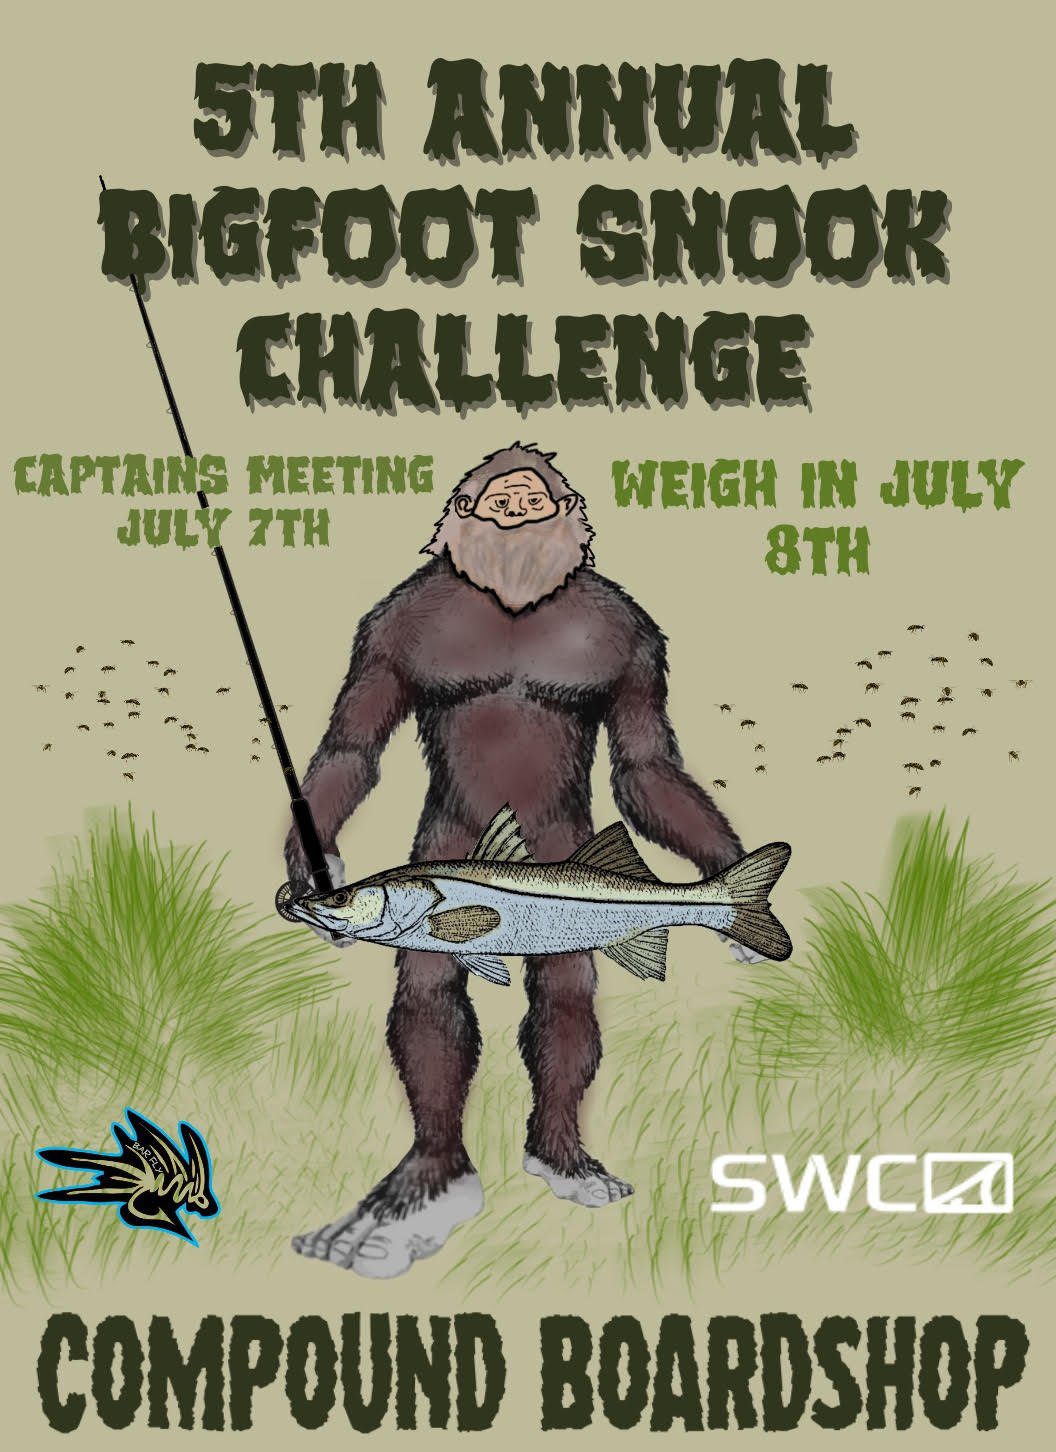 Bigfoot Snook Tournament coming in July